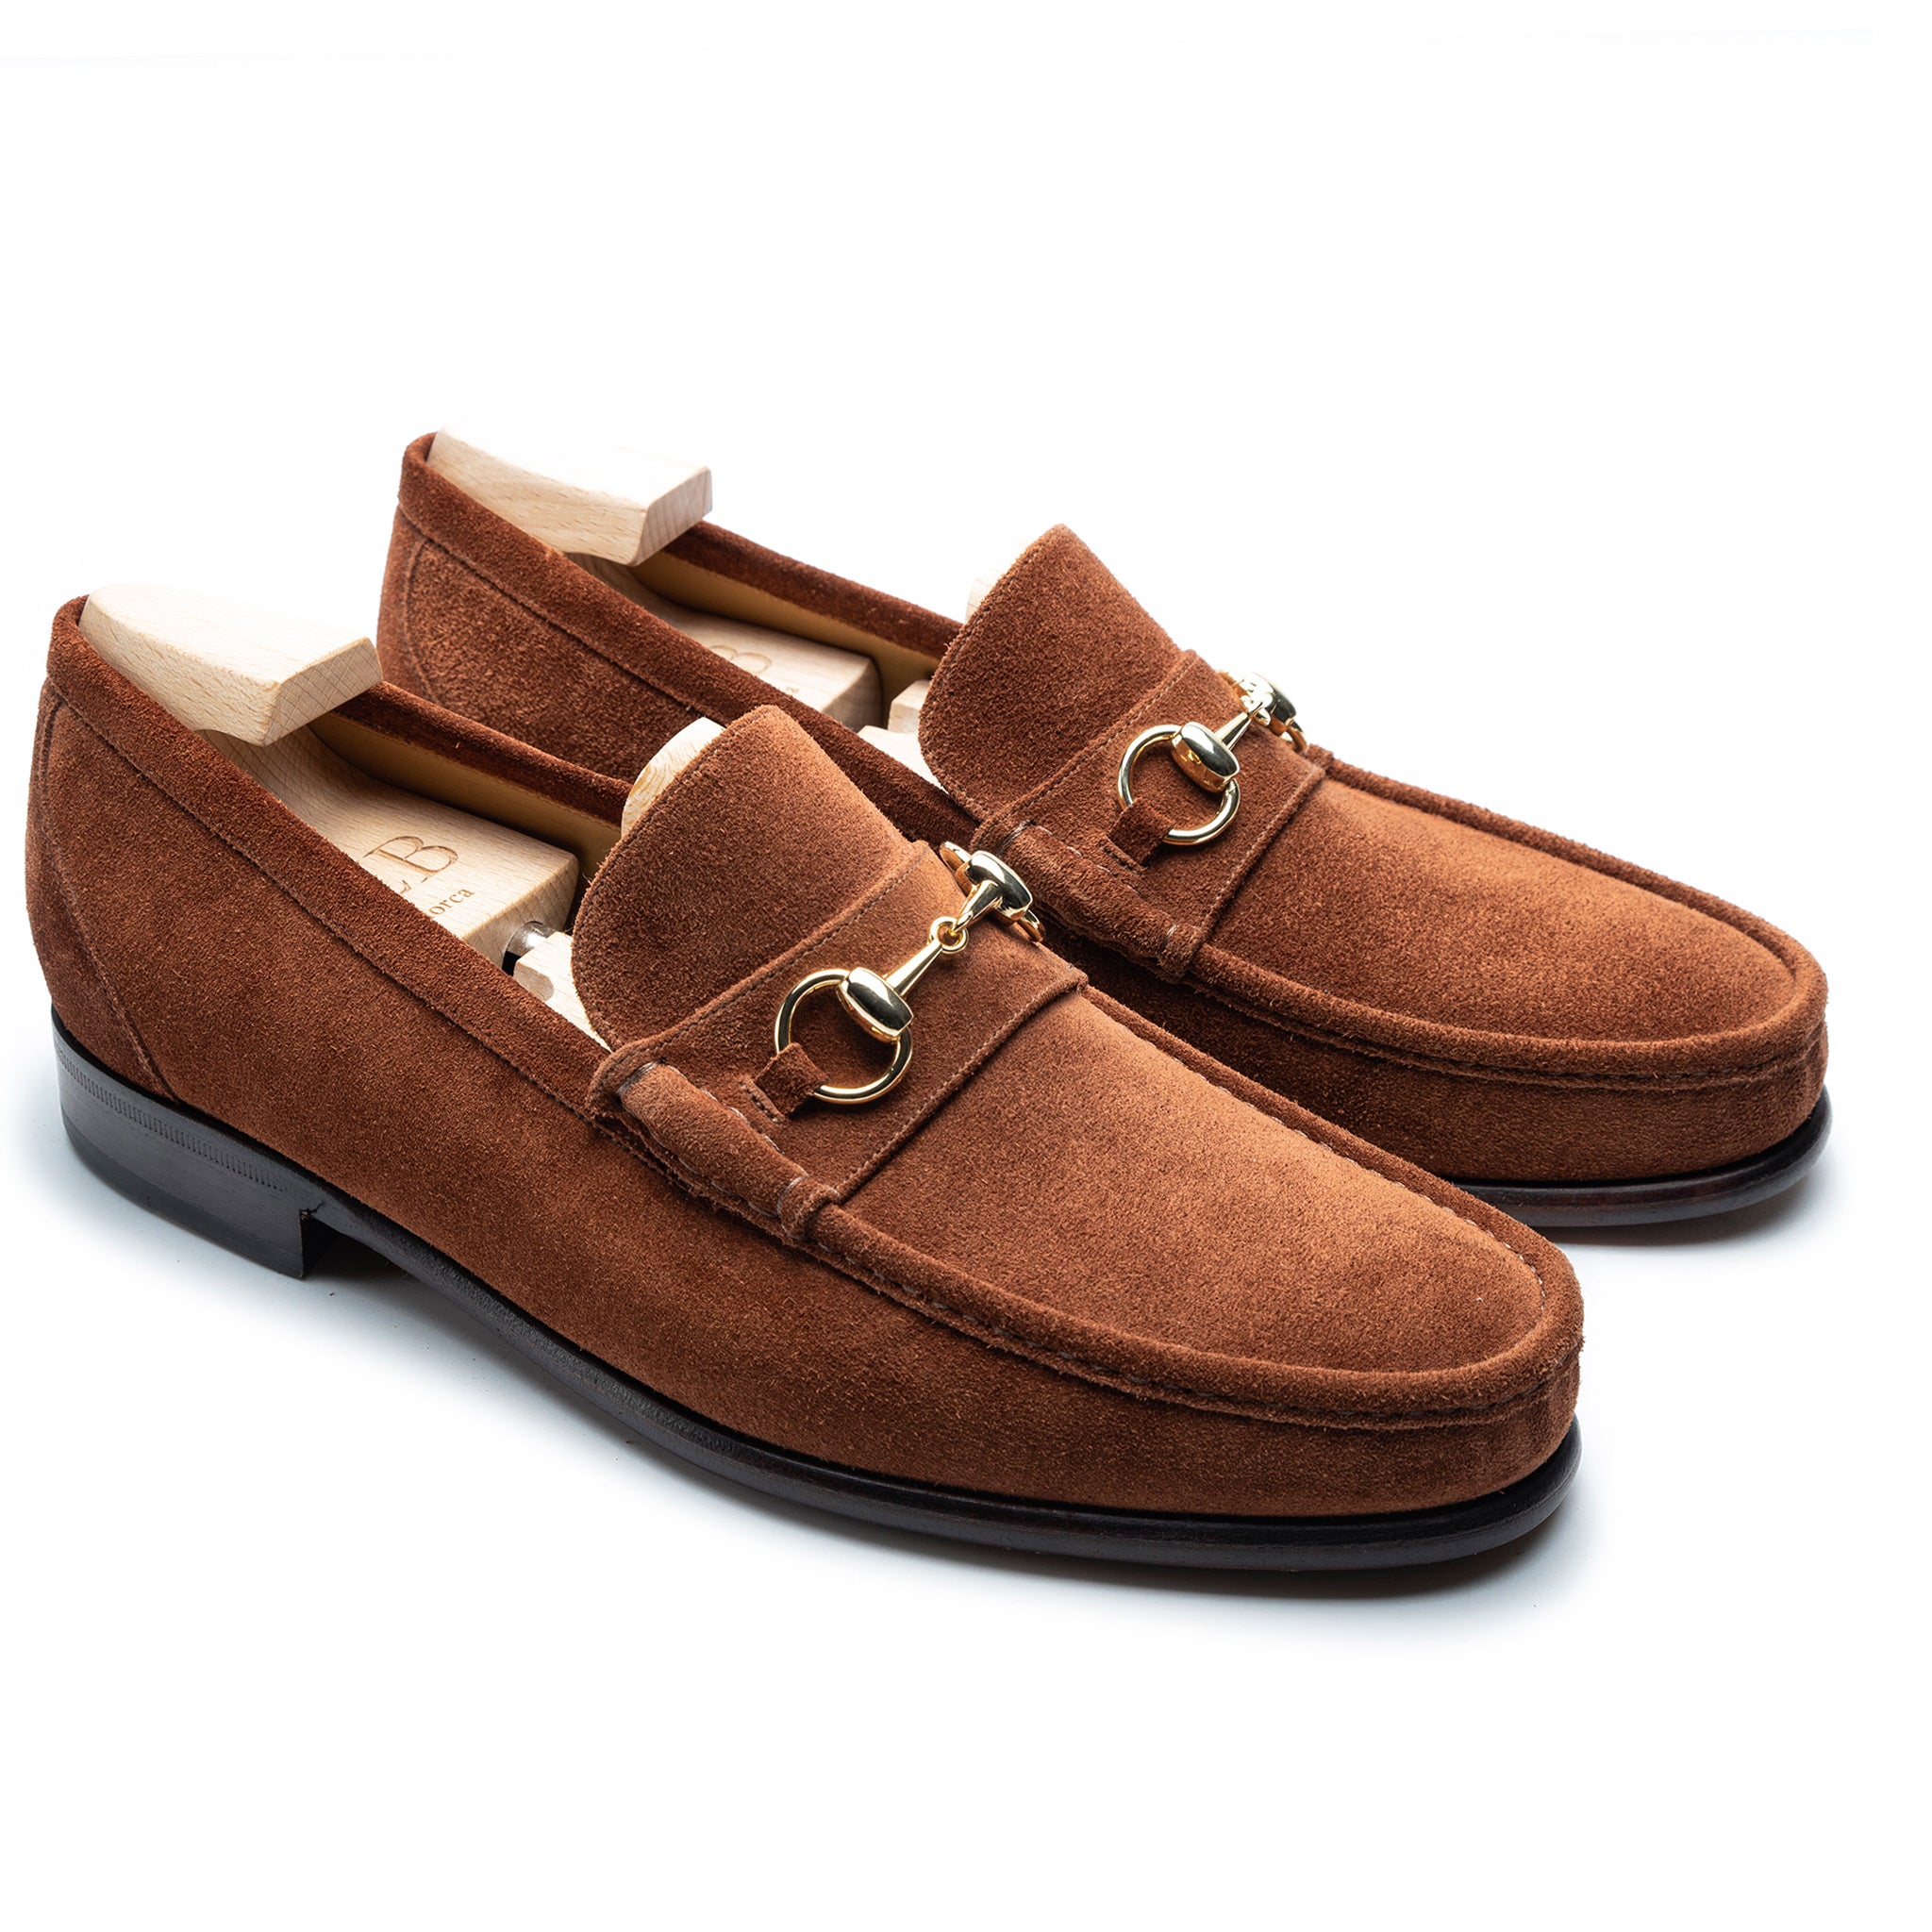 10 Fashionable Men's Loafers Shoes Models For Your Inspiration